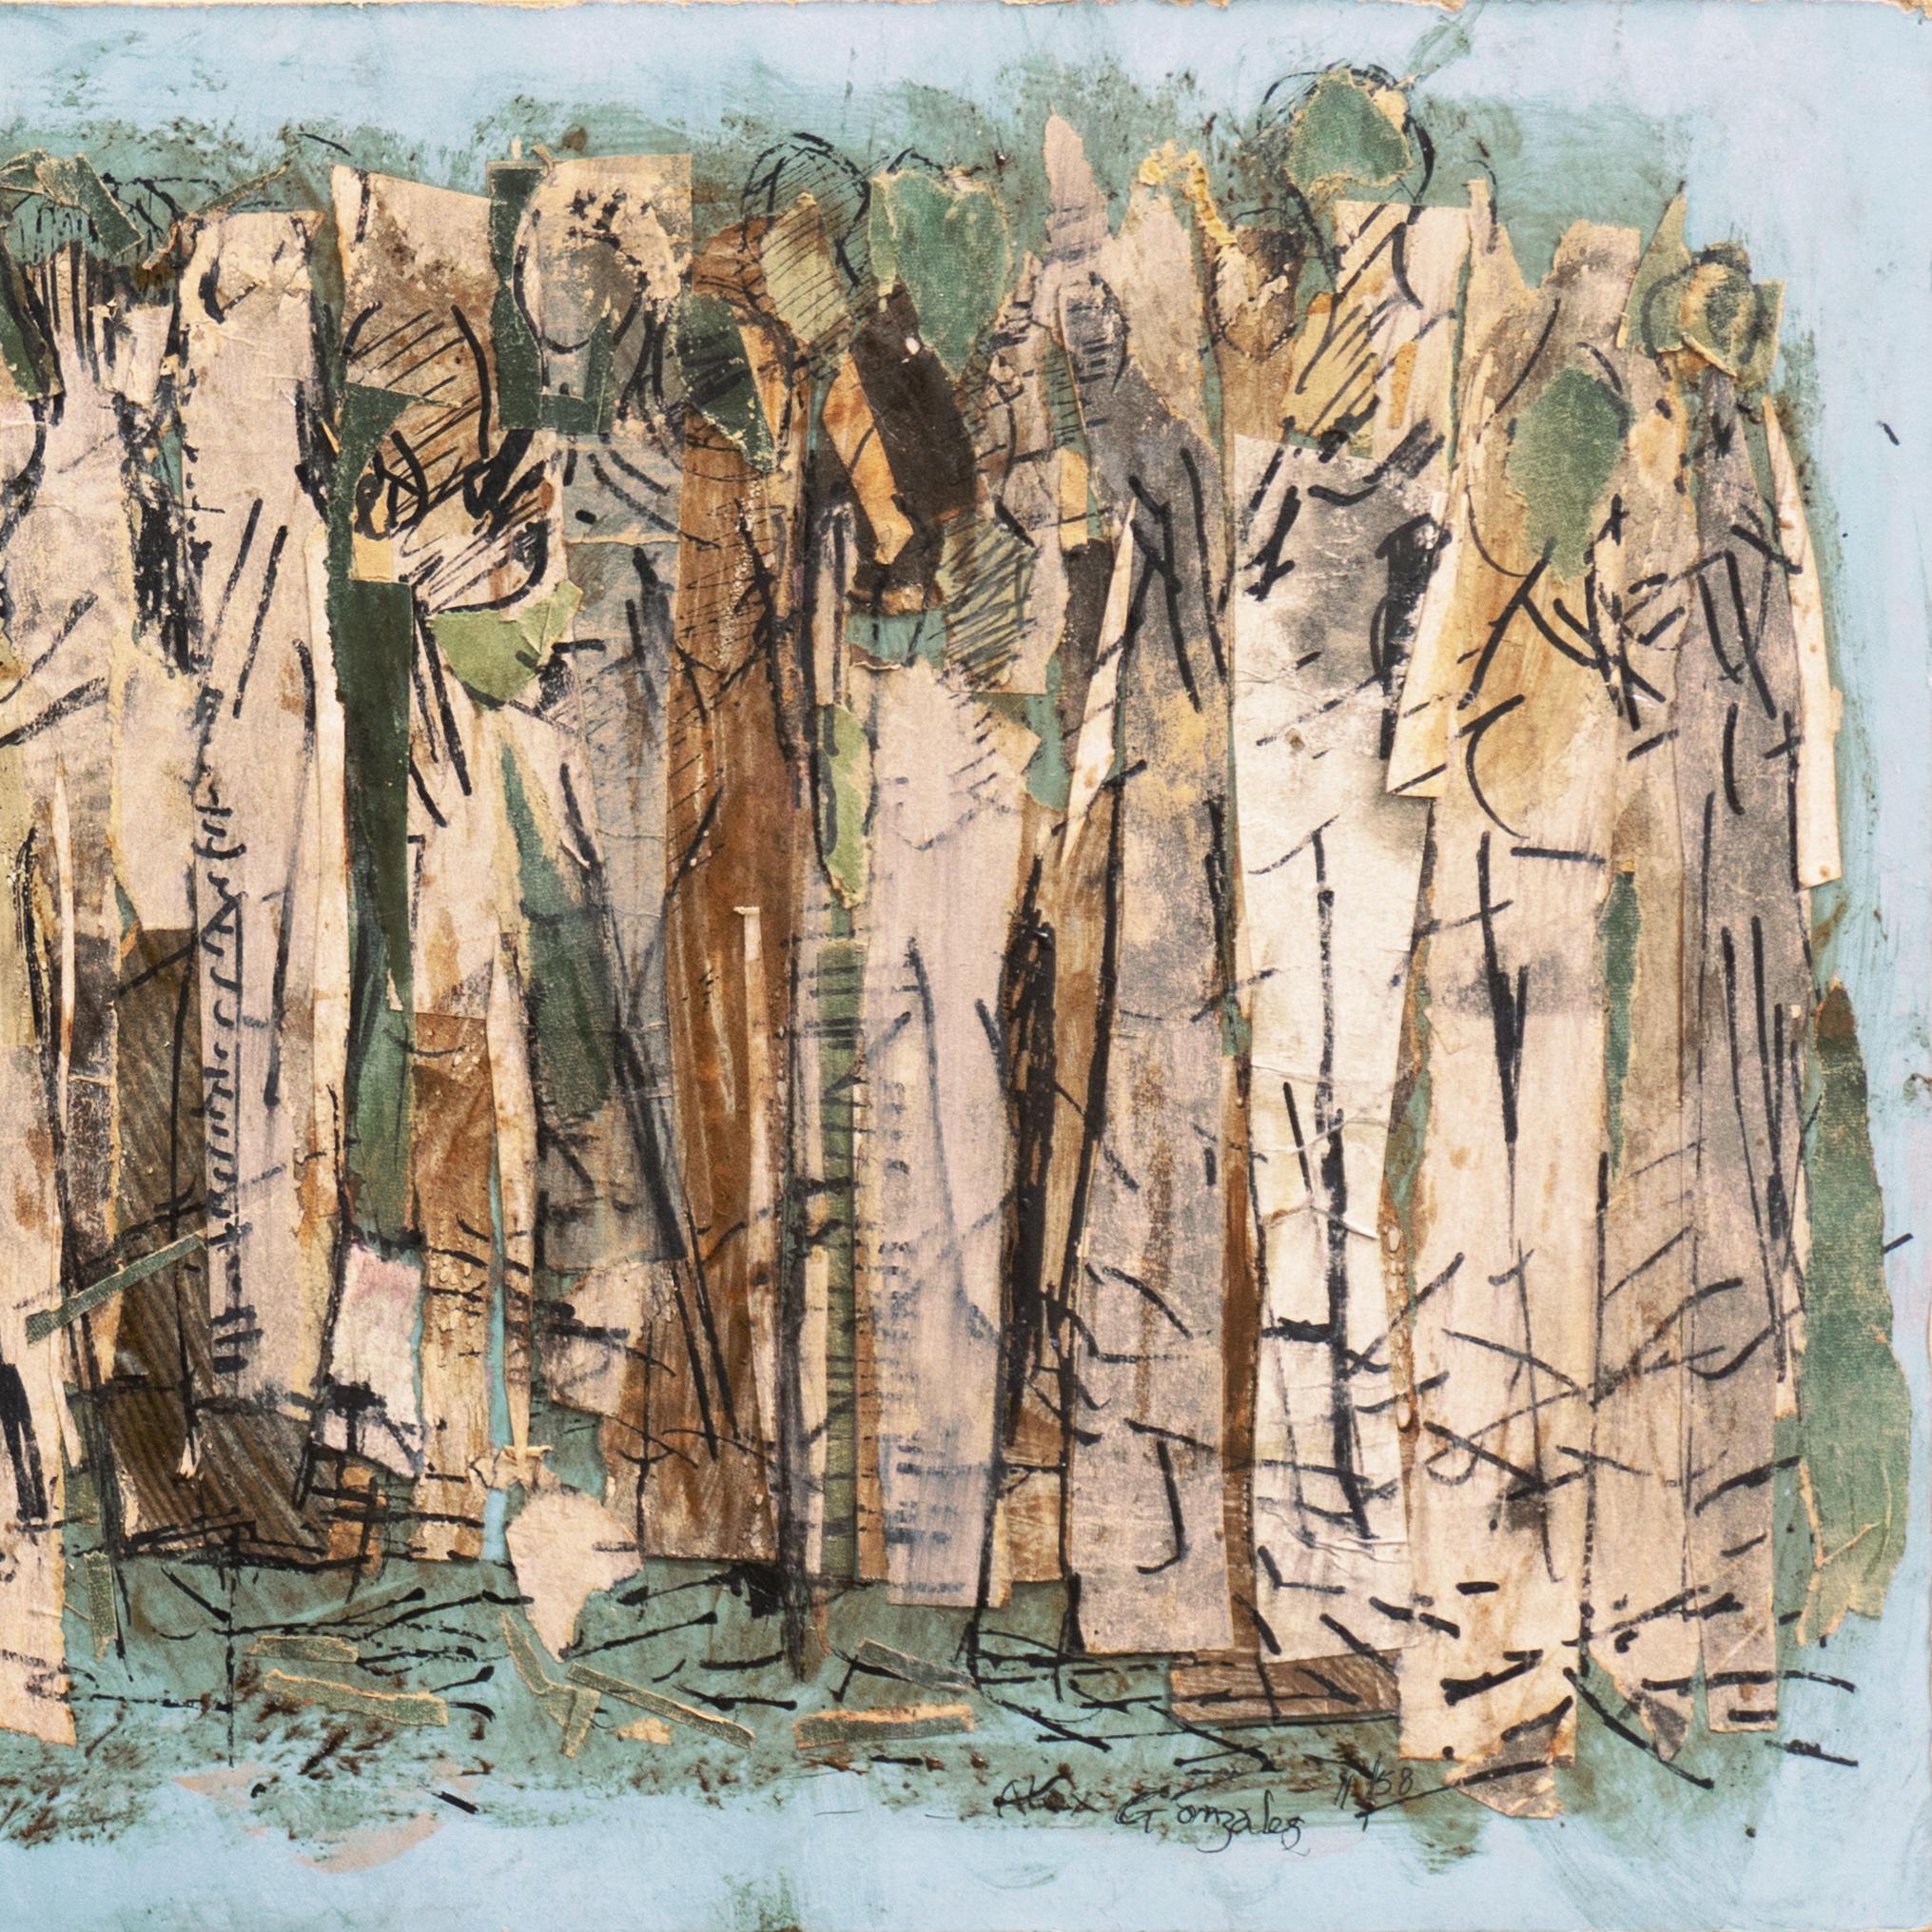 Signed lower right, 'Alex Gonzales' (American, 1927-2020) and dated, '11/58'.

A delicate and enigmatic, mid-century, painted collage showing a procession of figures contrasted against an olive green and sky-blue background.

Alex Gonzales